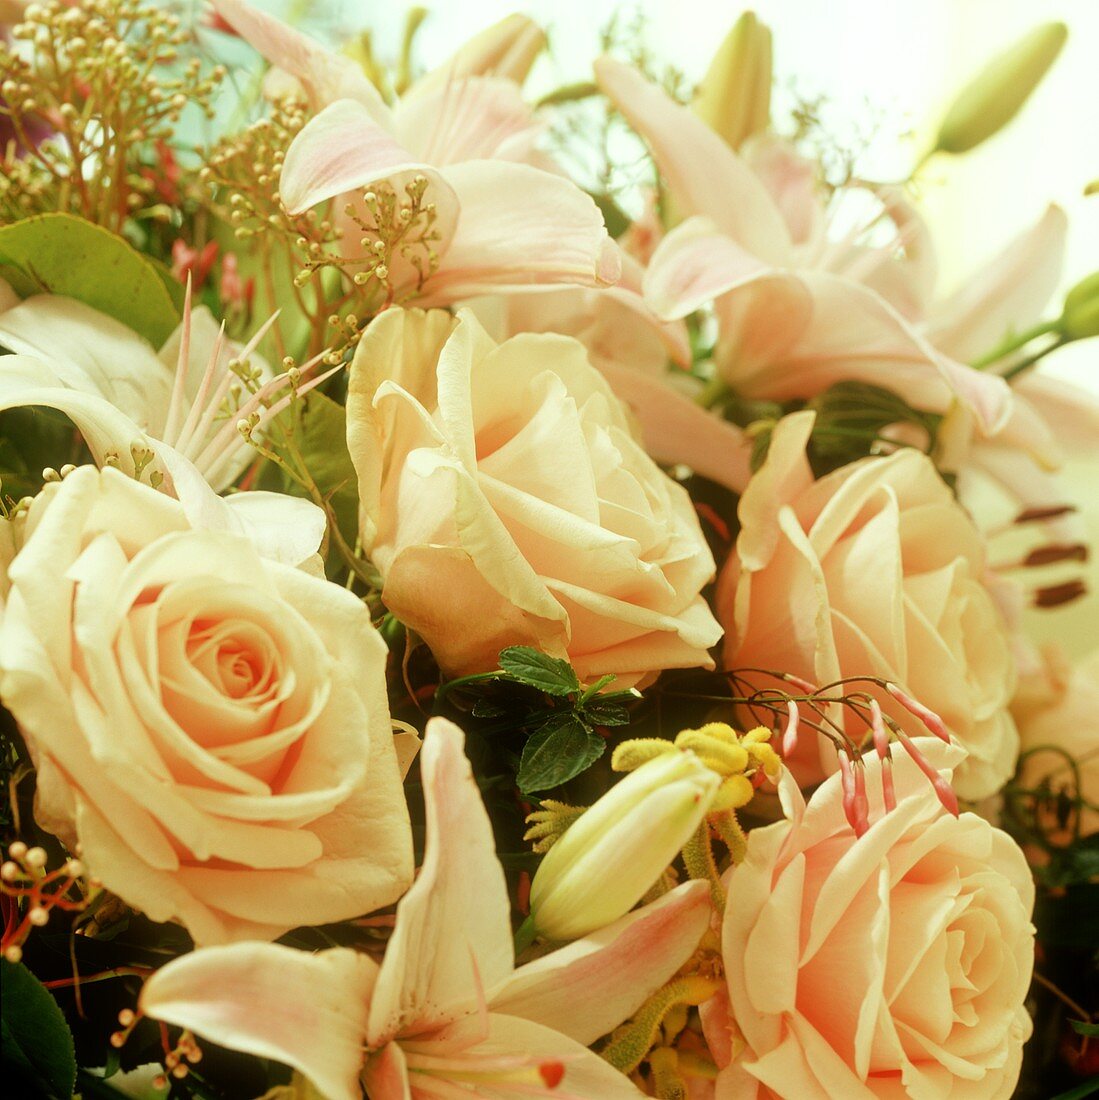 Bouquet of roses and lilies (close-up)